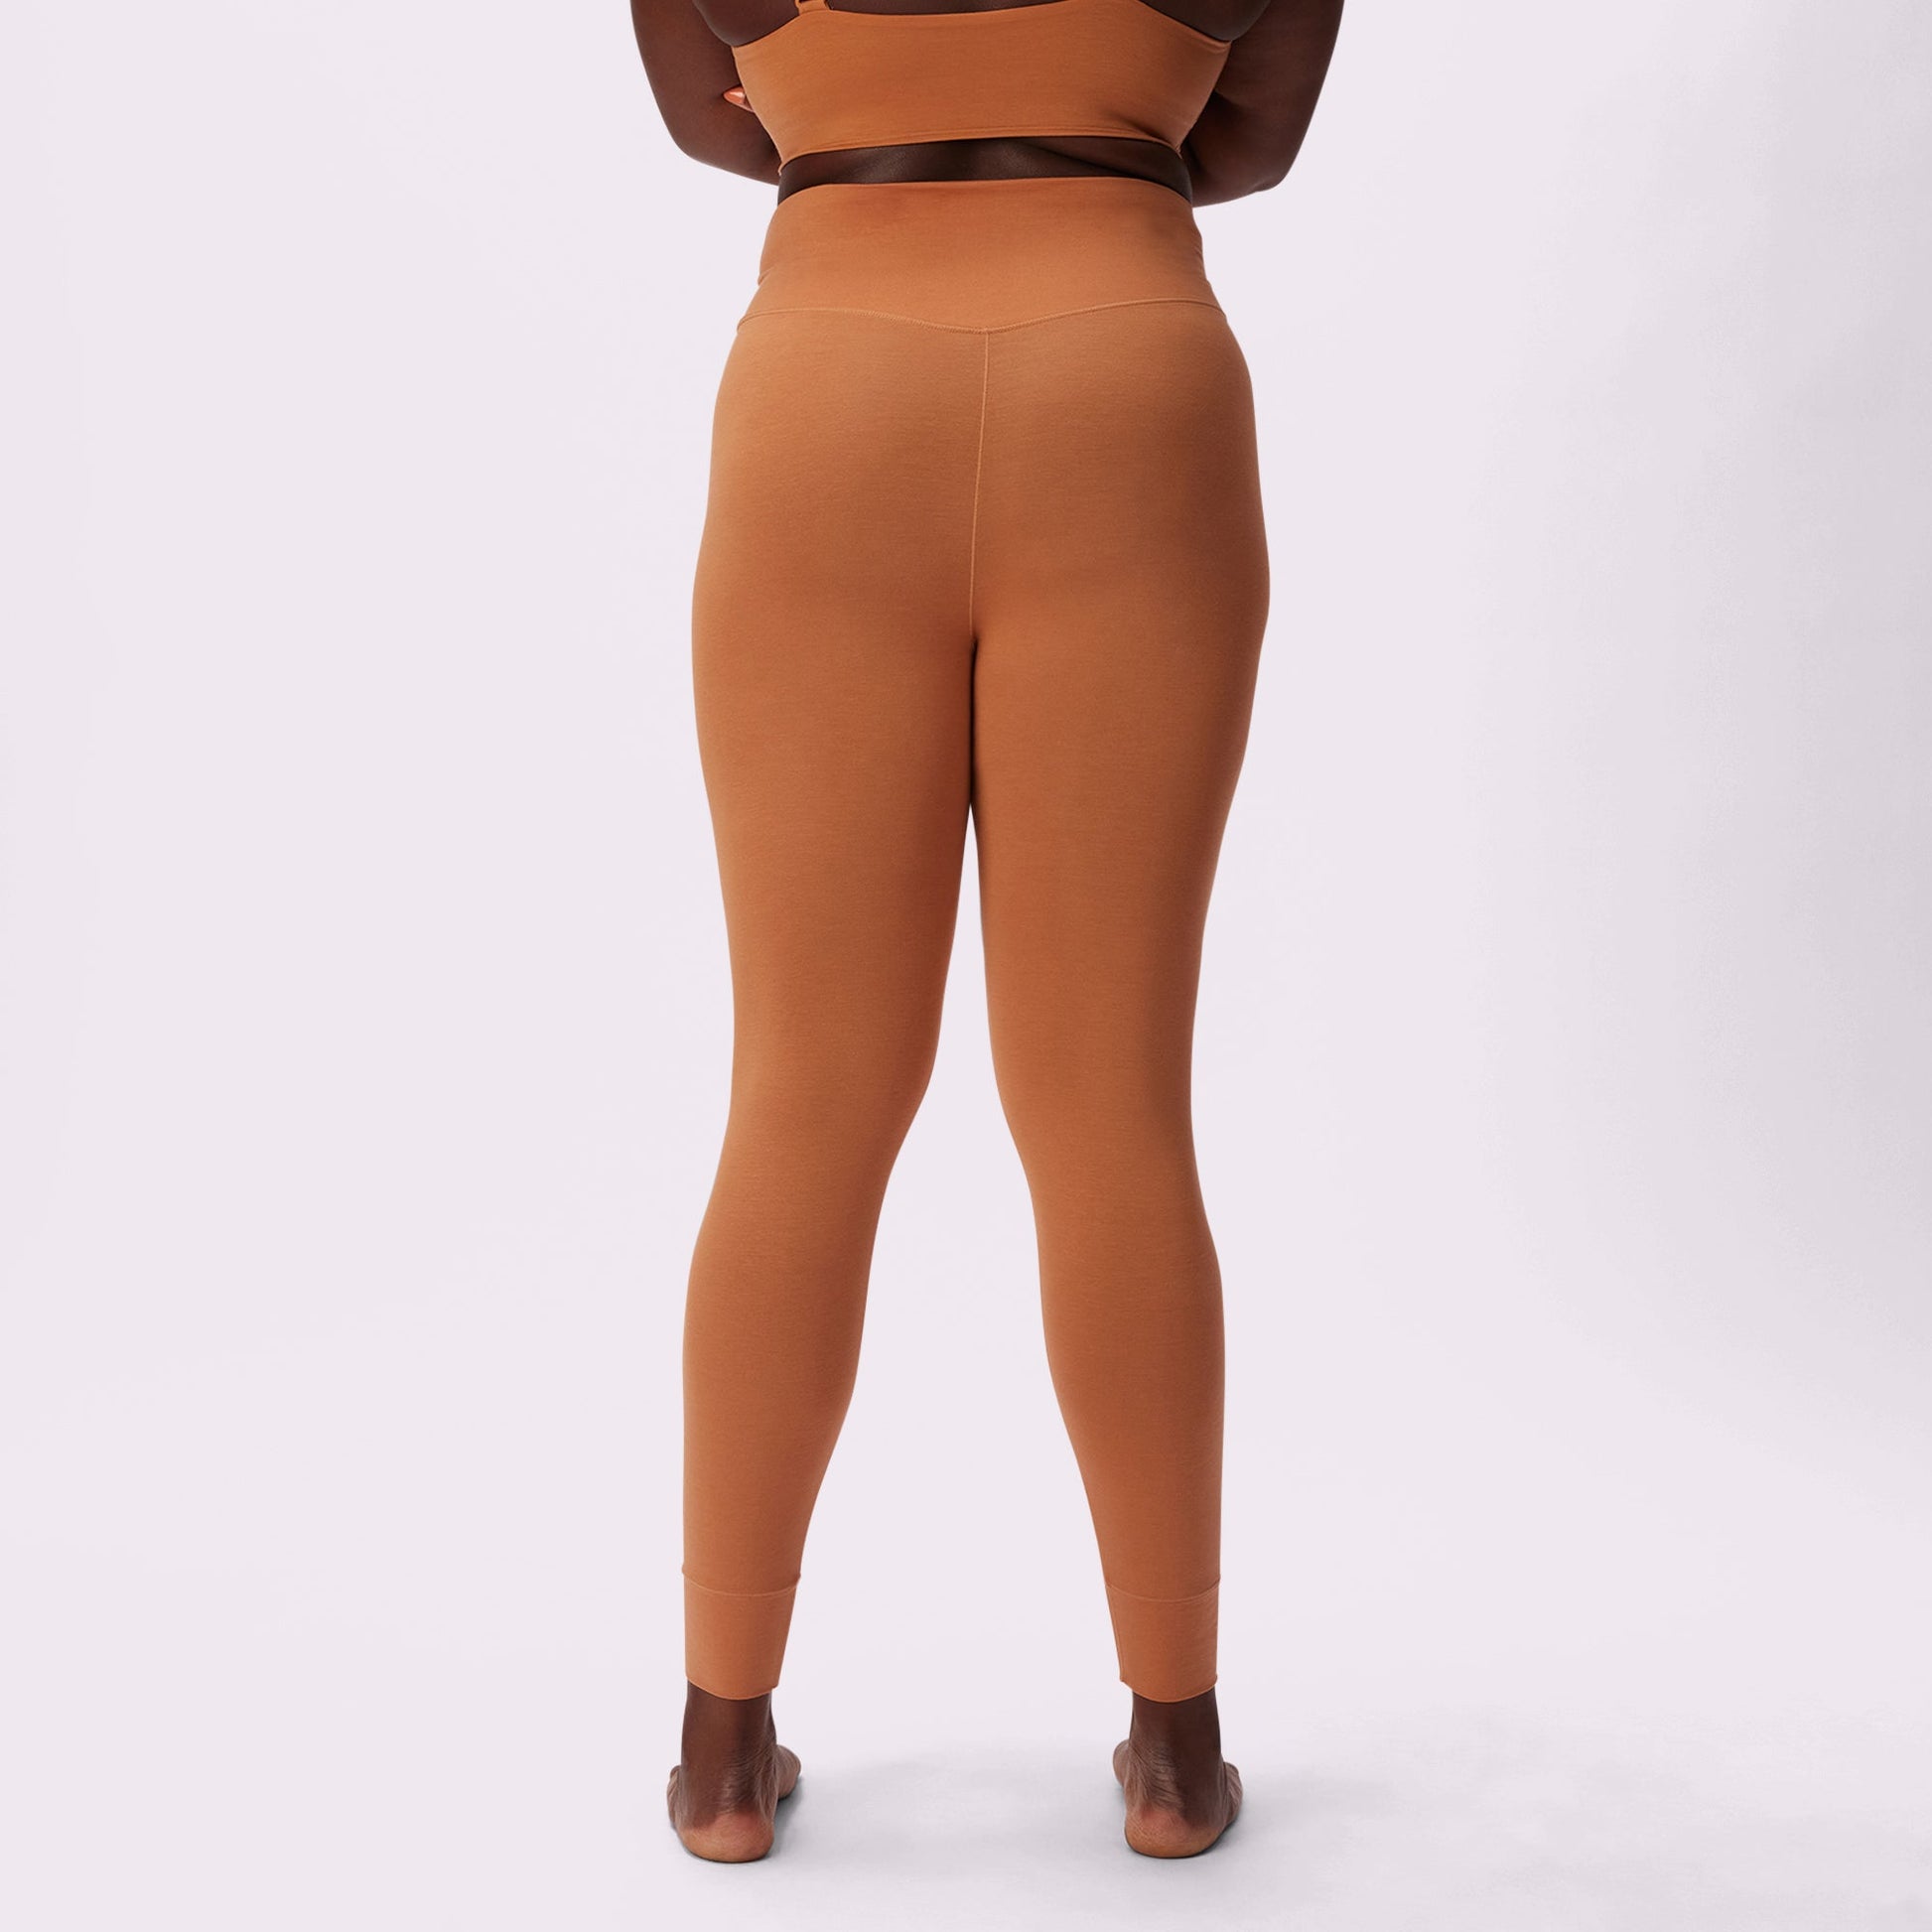 Summer Womens Lightweight Nylon Leggings Under Shorts And Shorts Set  Comfortable And Stylish Outfits In Various Cotton Colors From Freshadang,  $12.03